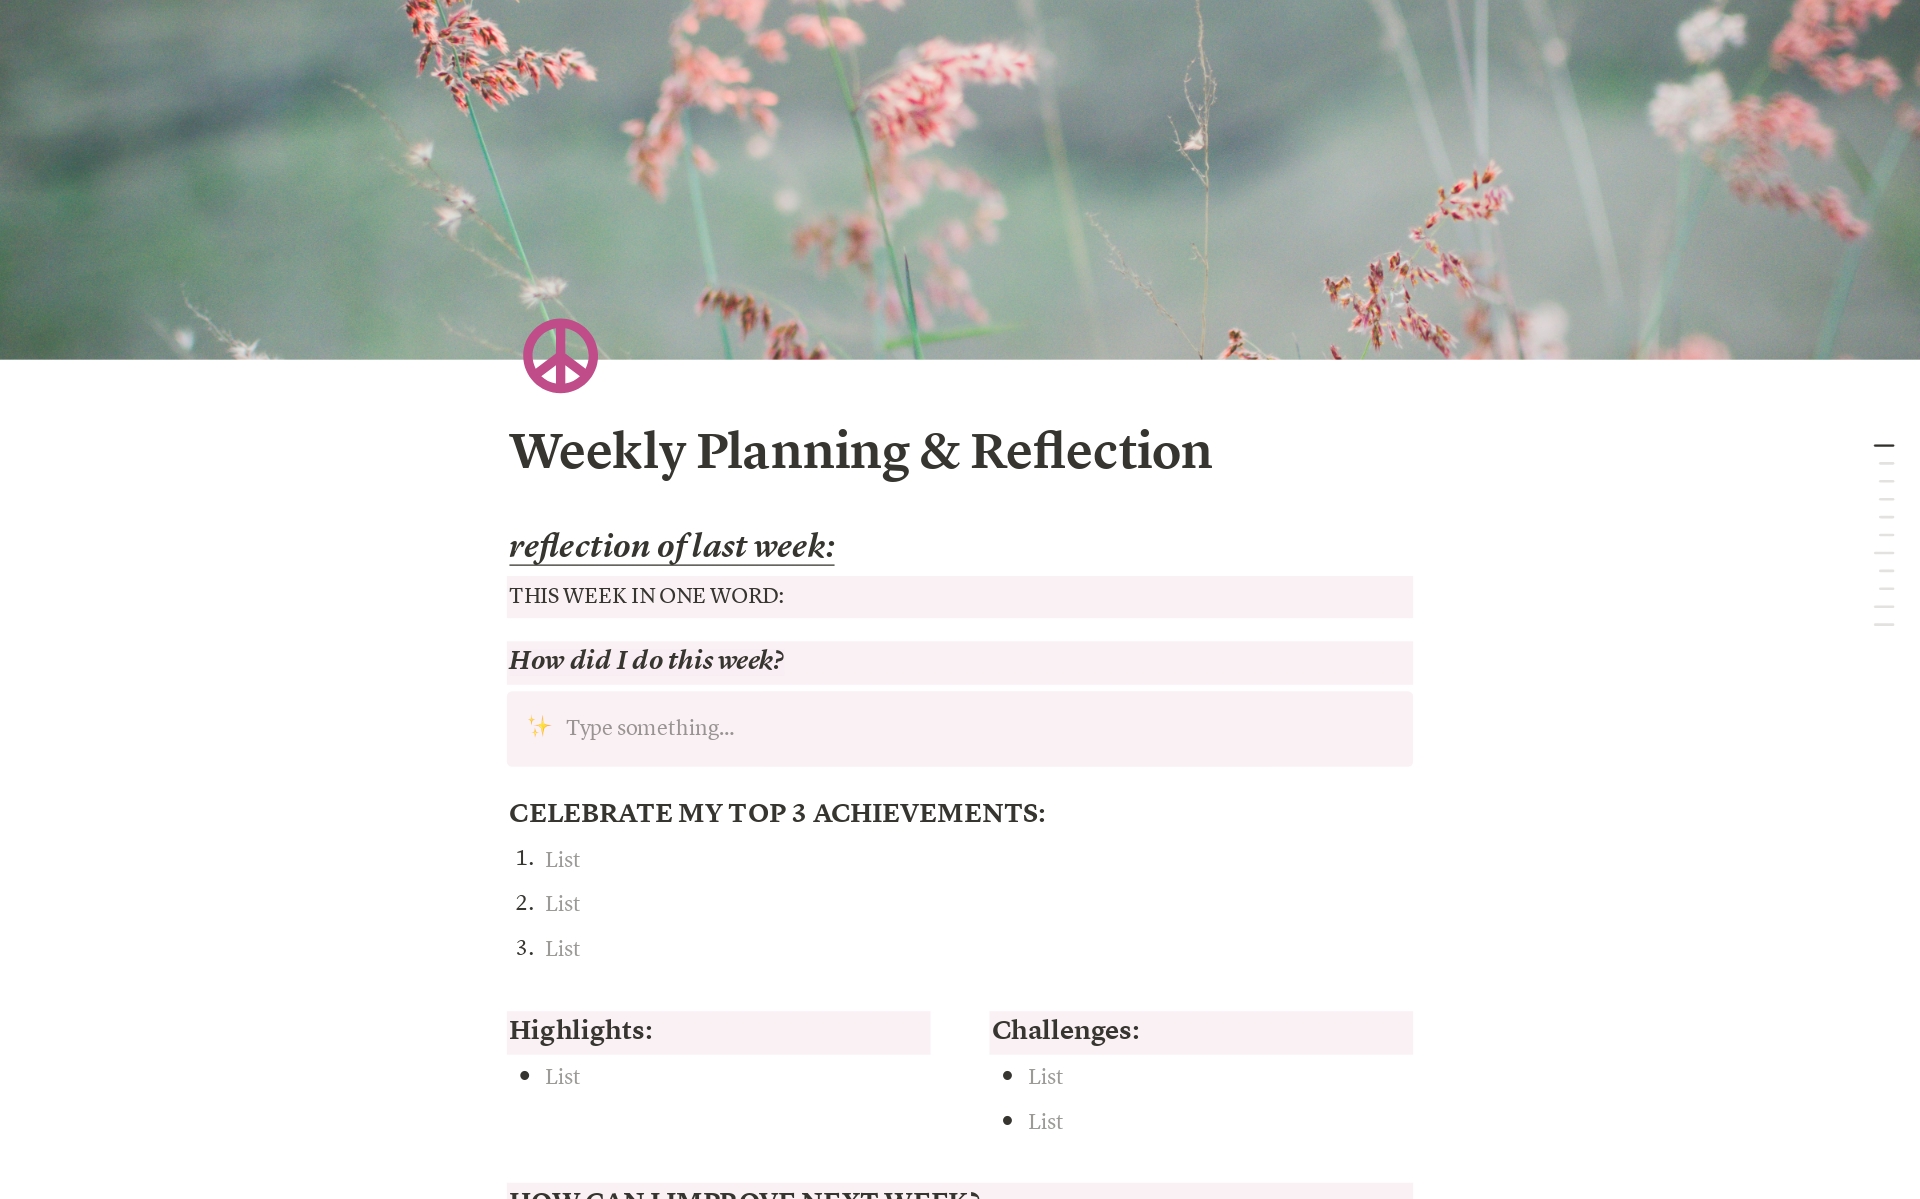 This template helps you check in at the end of every week to: 
1. Reflect on how your week went 
2. Plan the coming week
3. Track daily habits you want to make into routines